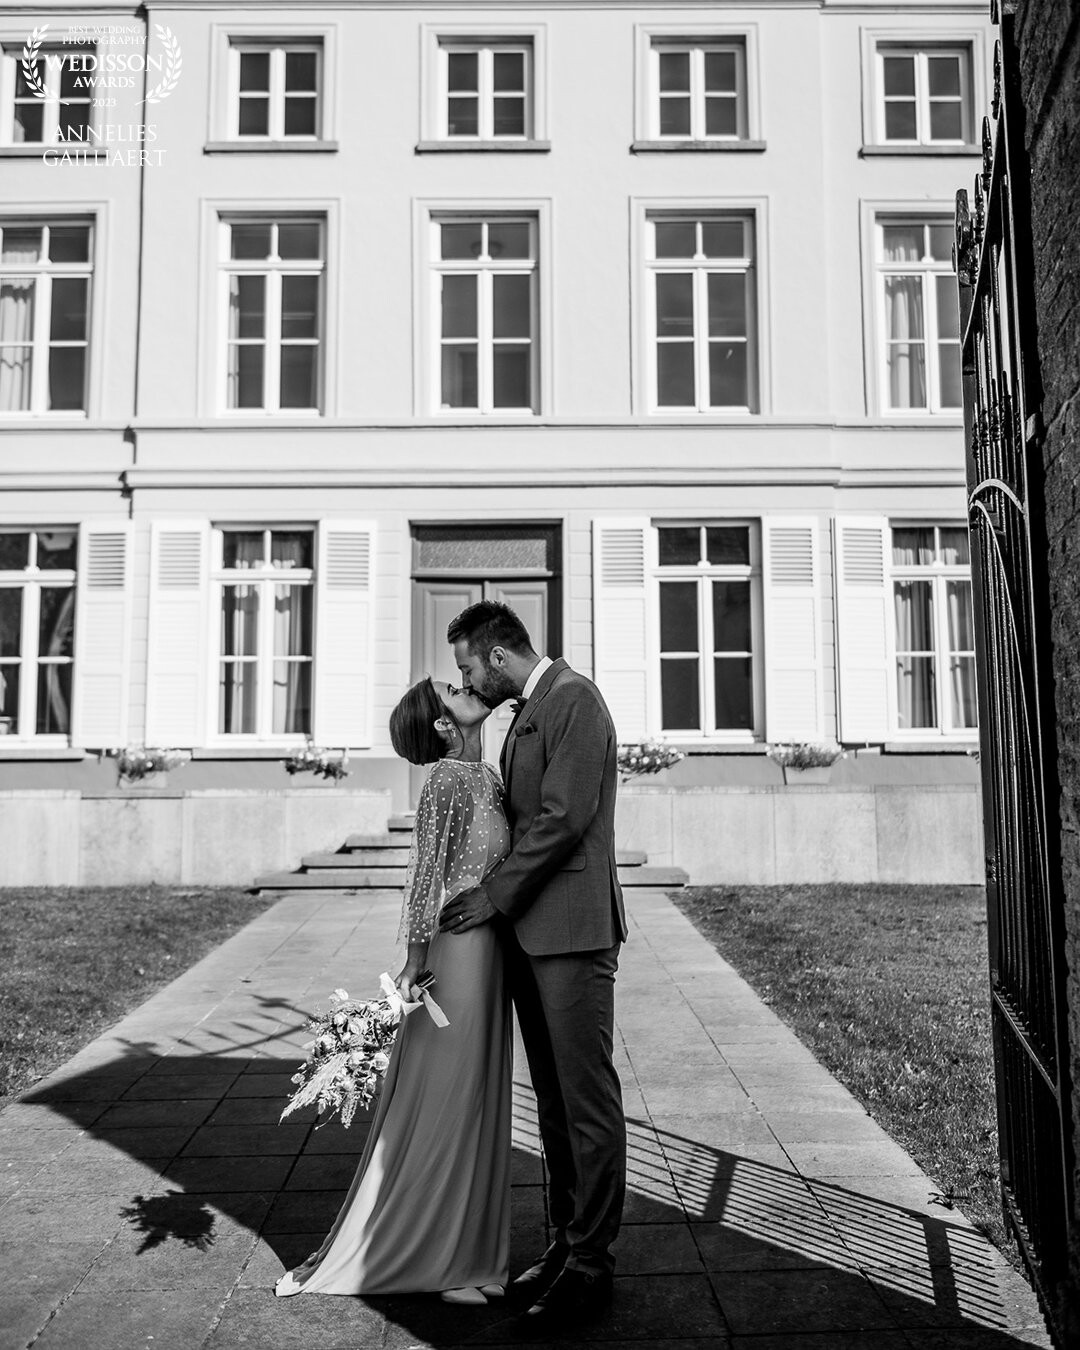 In front of the city hall where they got married. I loved the contrast of them in the shade, with the bright sun illuminating the building